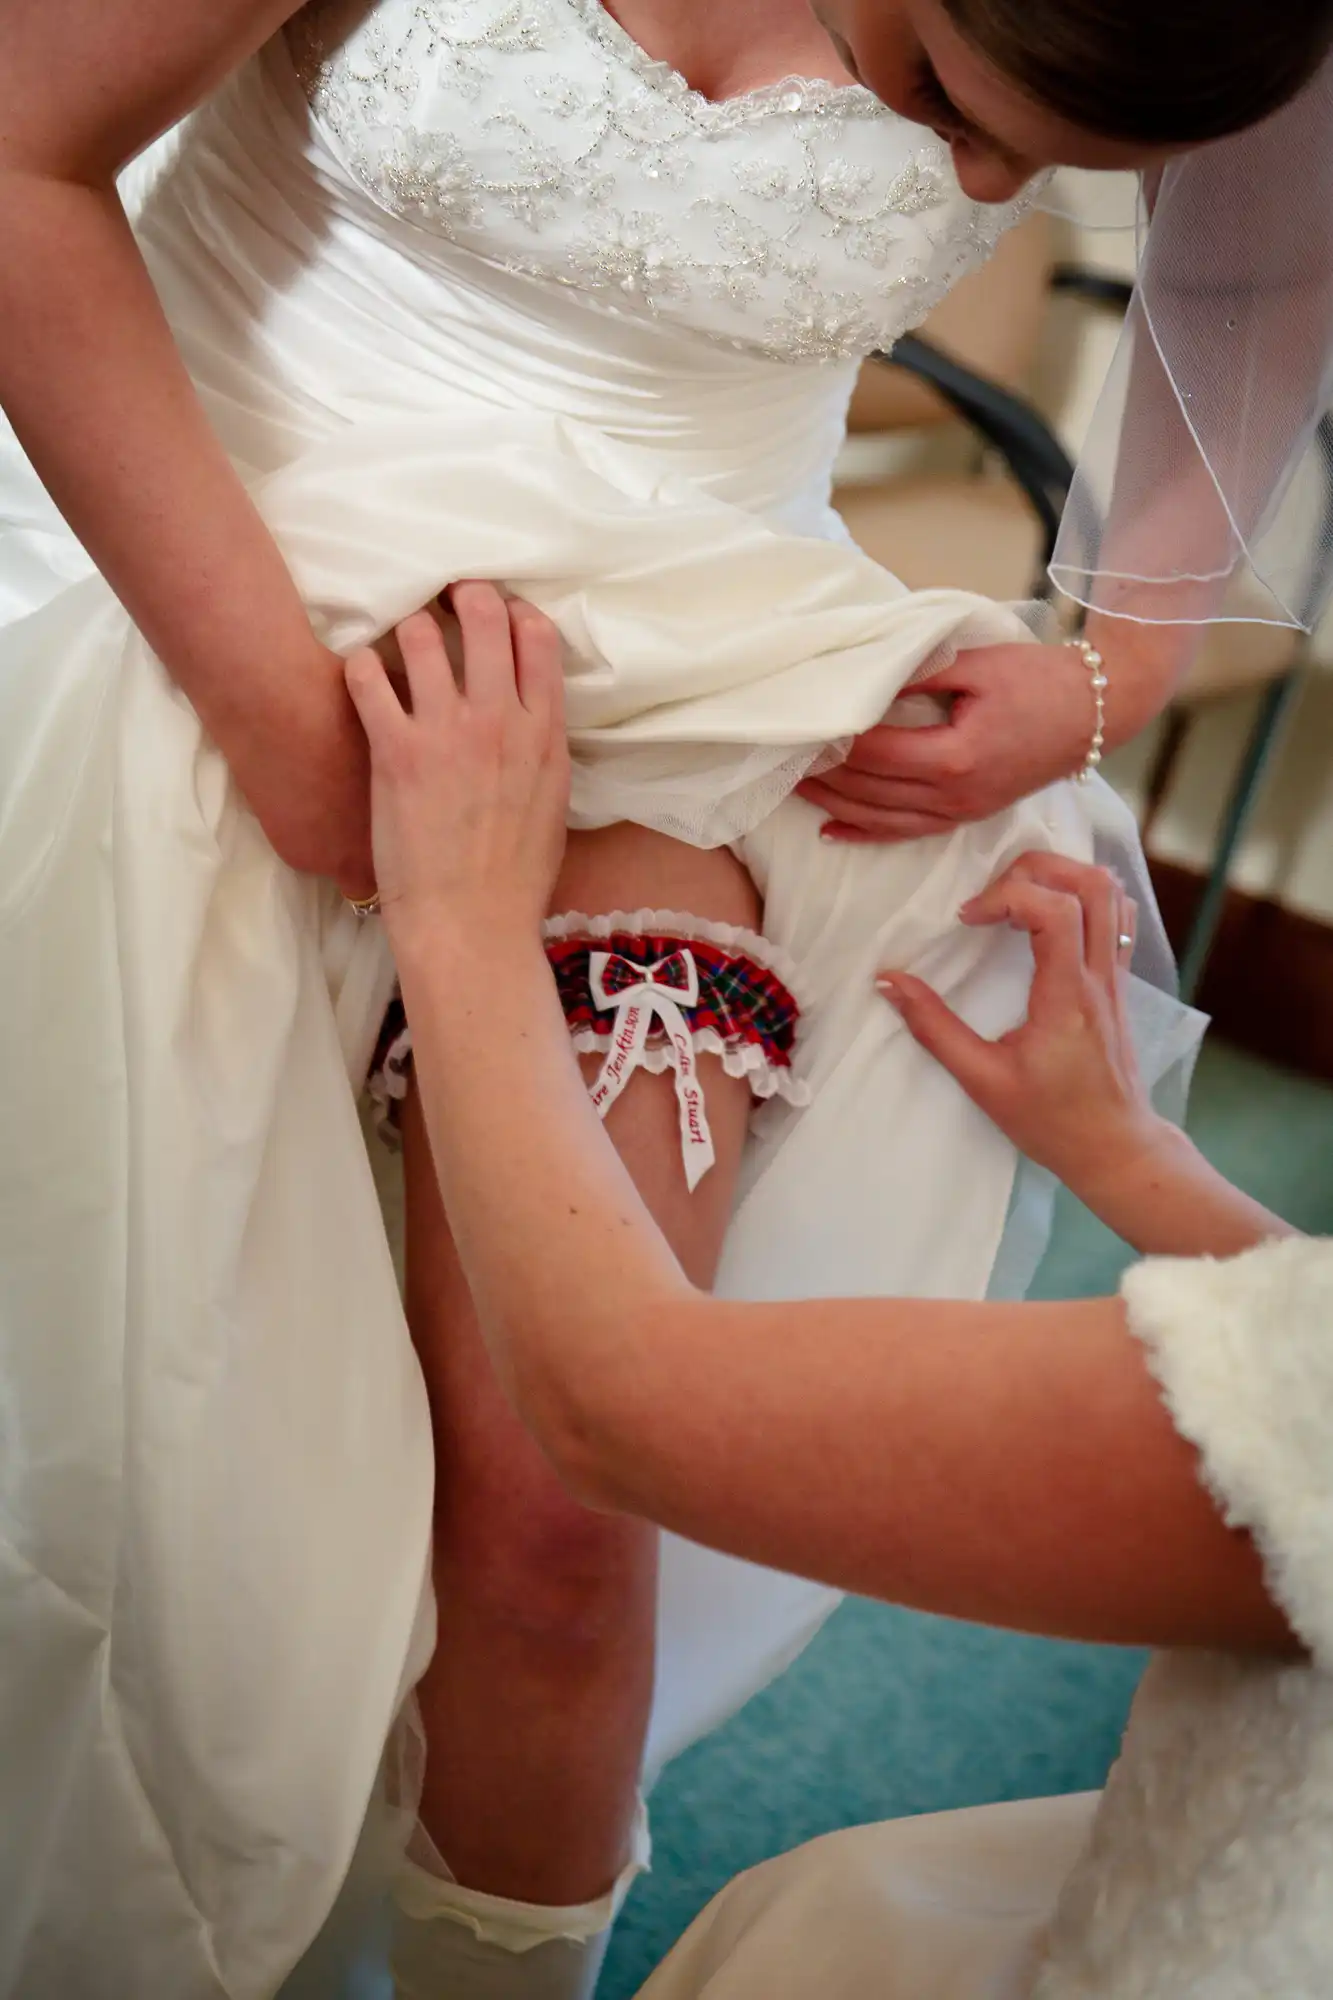 A bride adjusts a red and white garter on her thigh while another person assists, focusing on the details of her elegant white wedding dress.